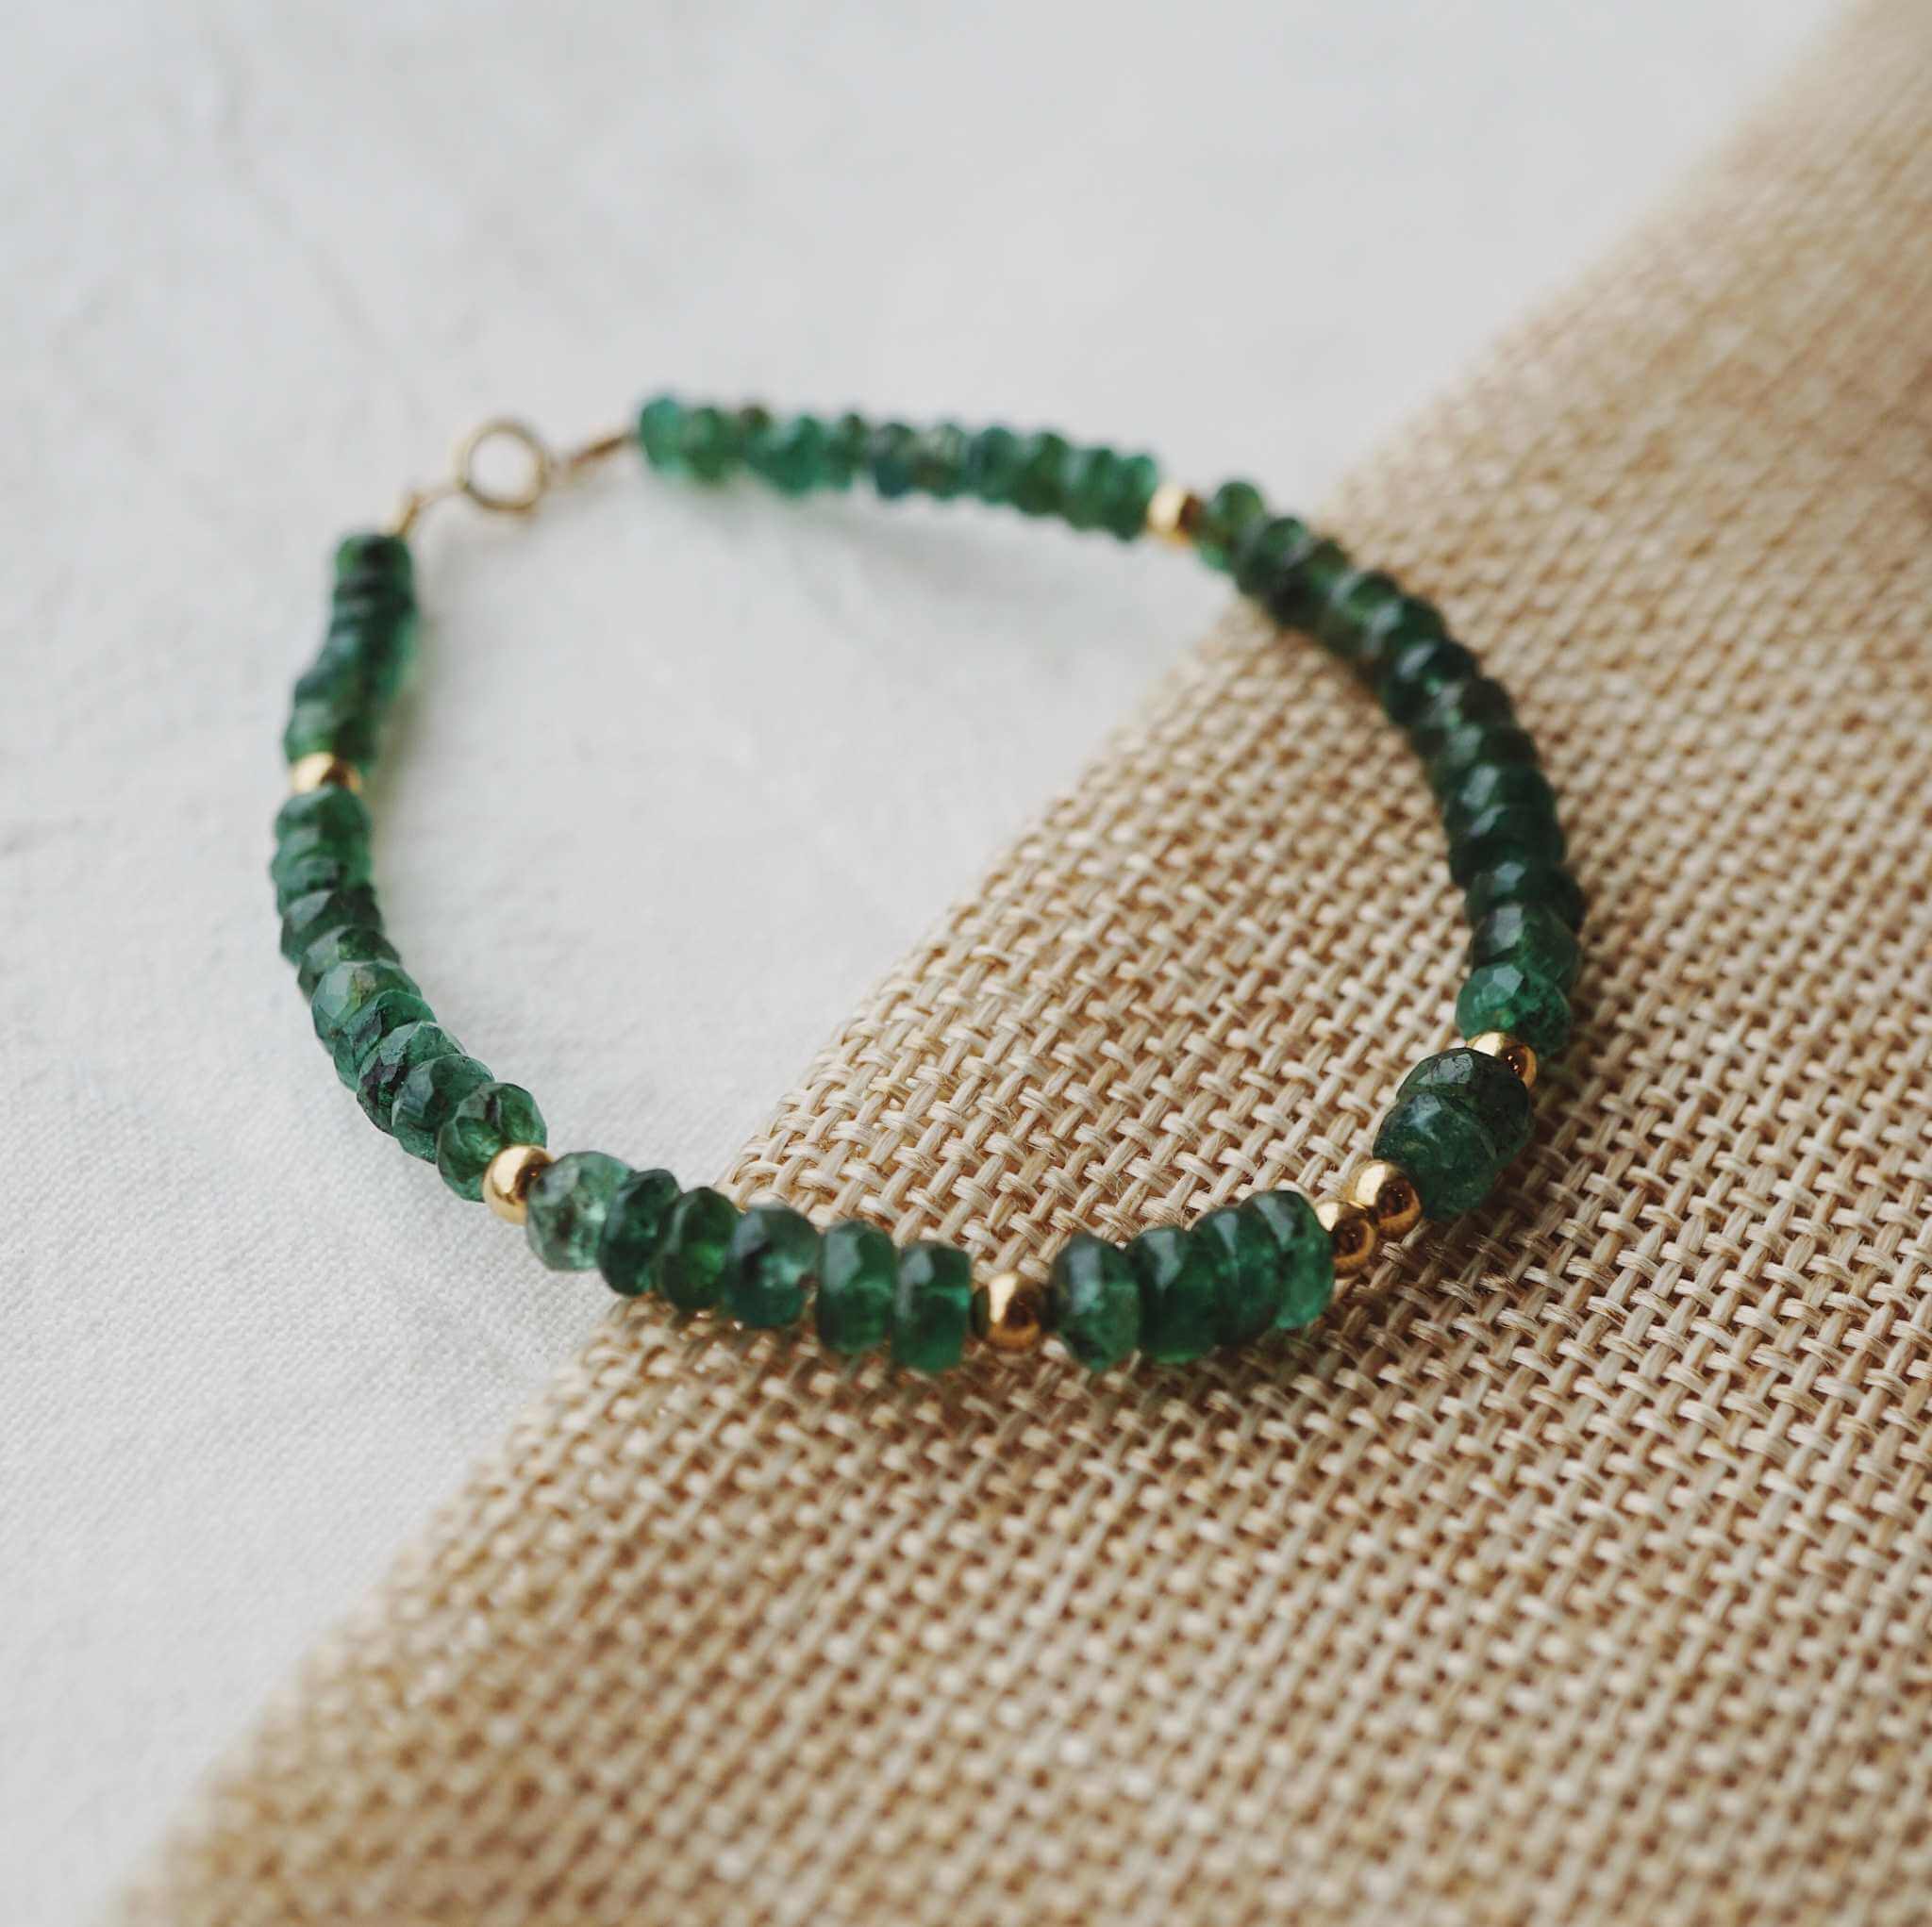 Gold Plated Bracelet with Green and White Crystals - Emerald Green Crystal Bracelet  Bangle by Blingvine